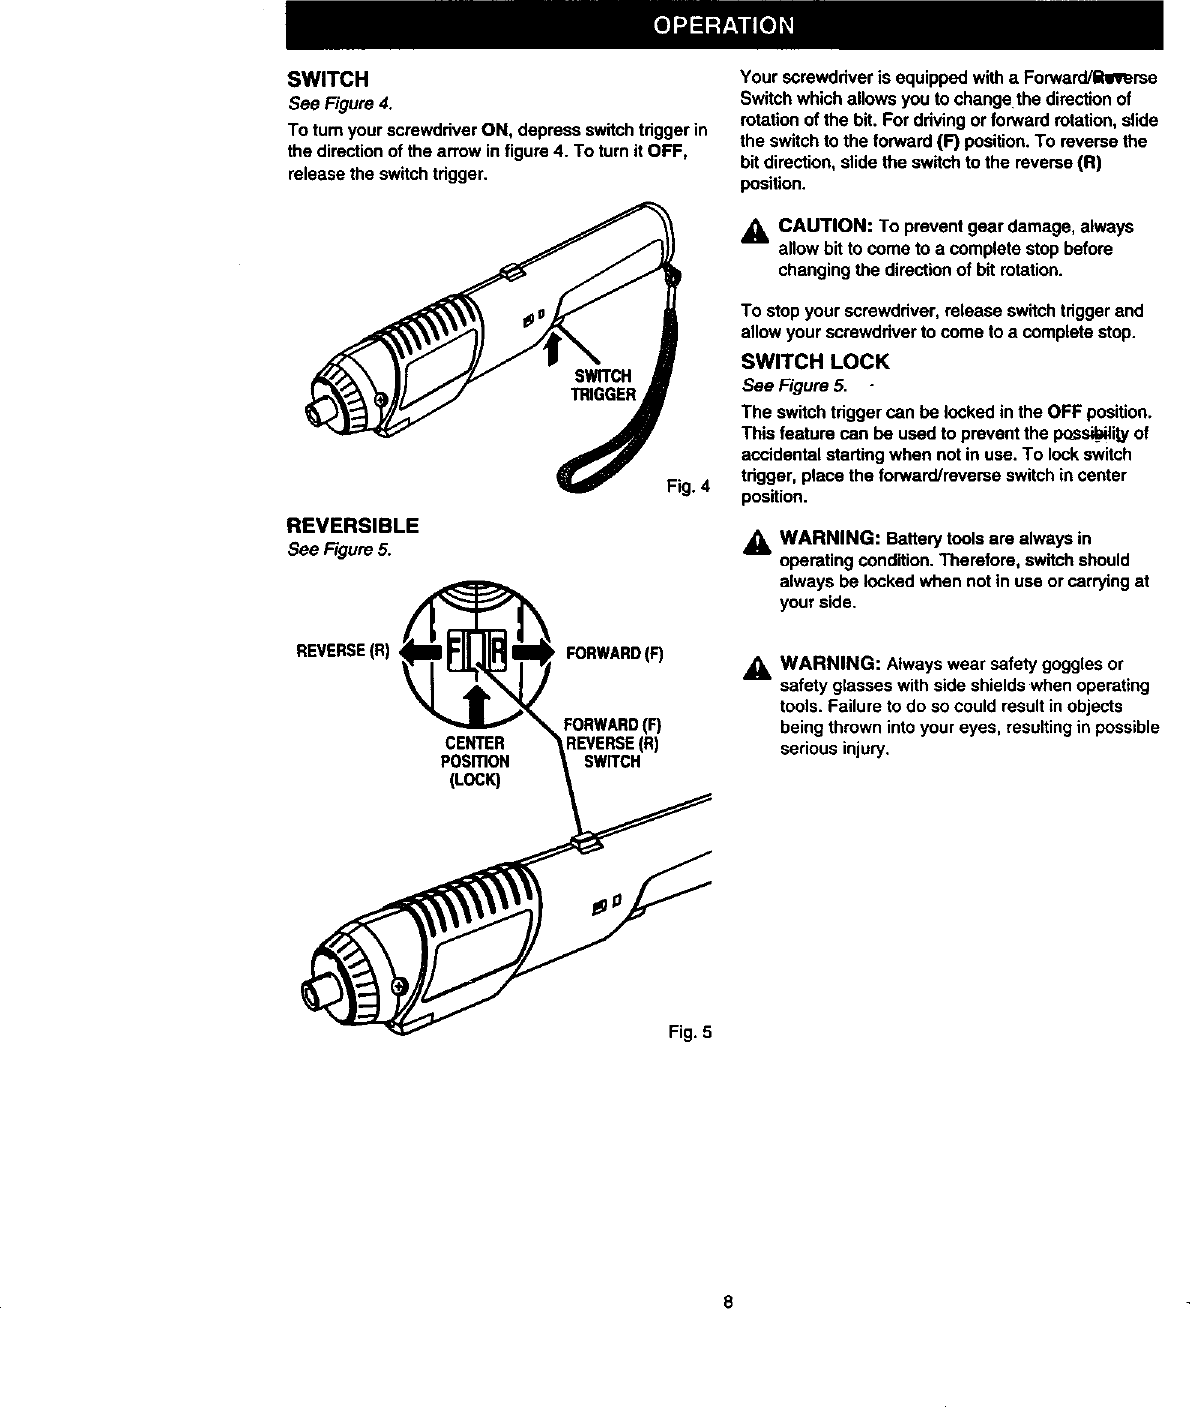 Page 8 of 12 - Craftsman 315111810 User Manual  SINGLE SPEED REVERSIBLE CORDLESS SCREWDRIVER - Manuals And Guides 98100166